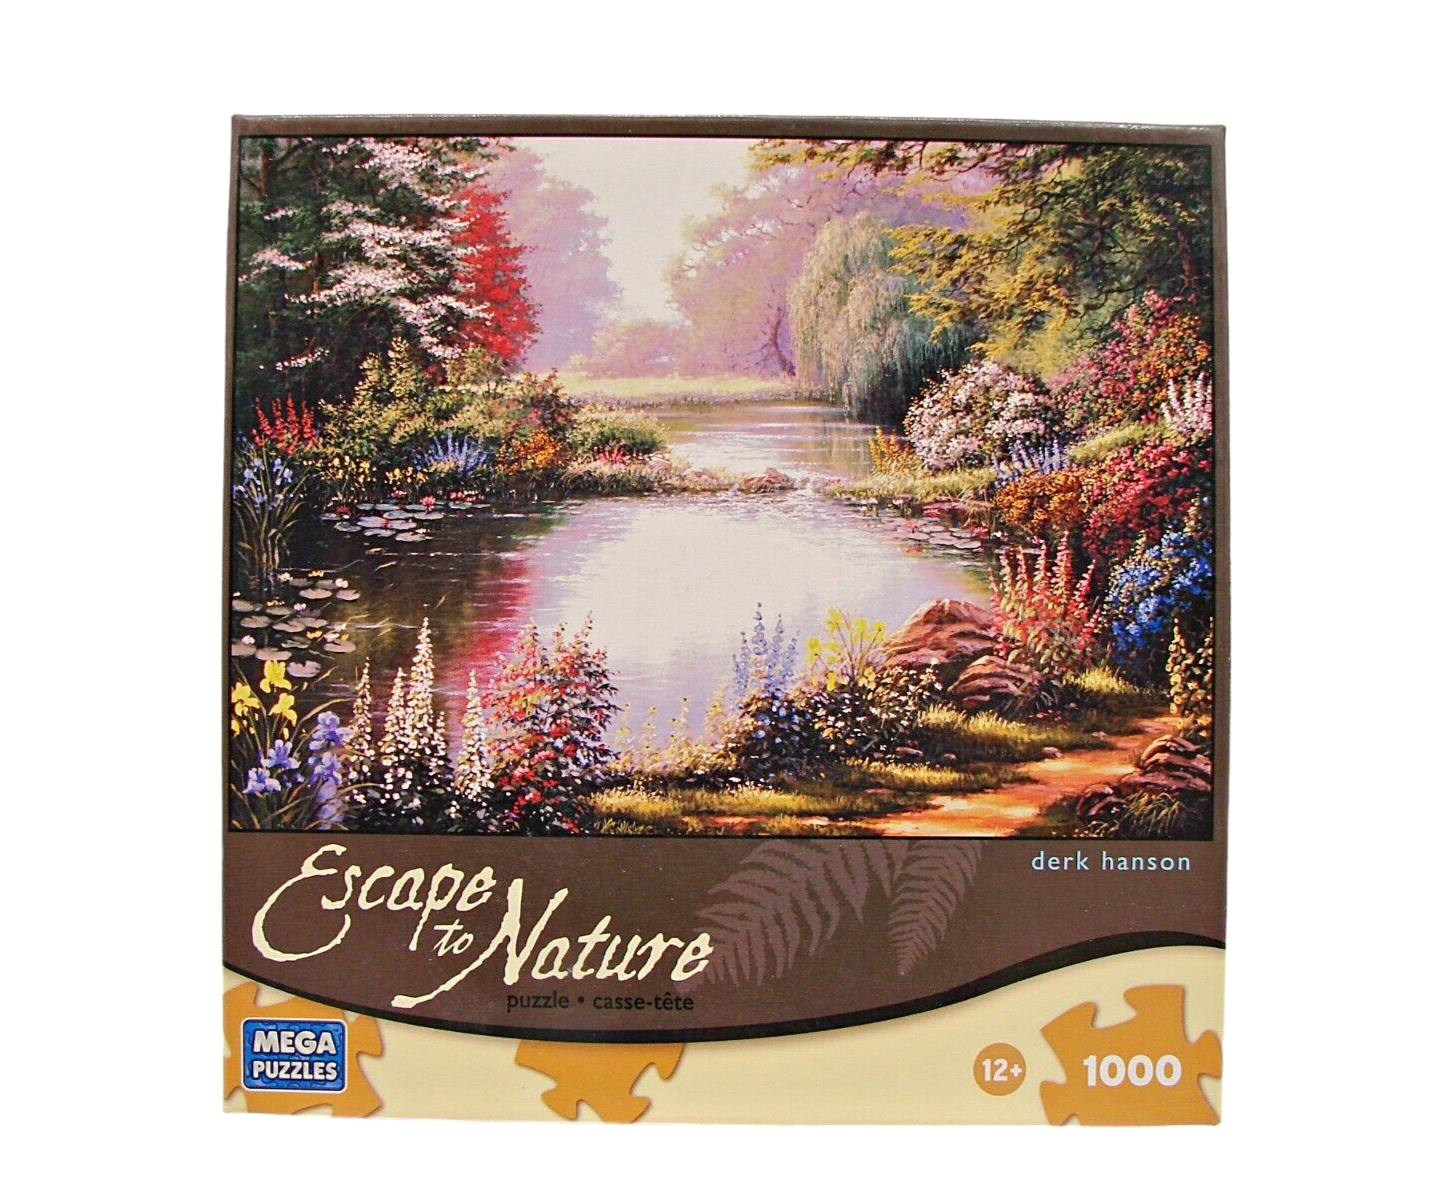 Primary image for Escape To Nature 1000 Piece Jigsaw Mega Puzzle Mountains Lake Floral Derk Hanson